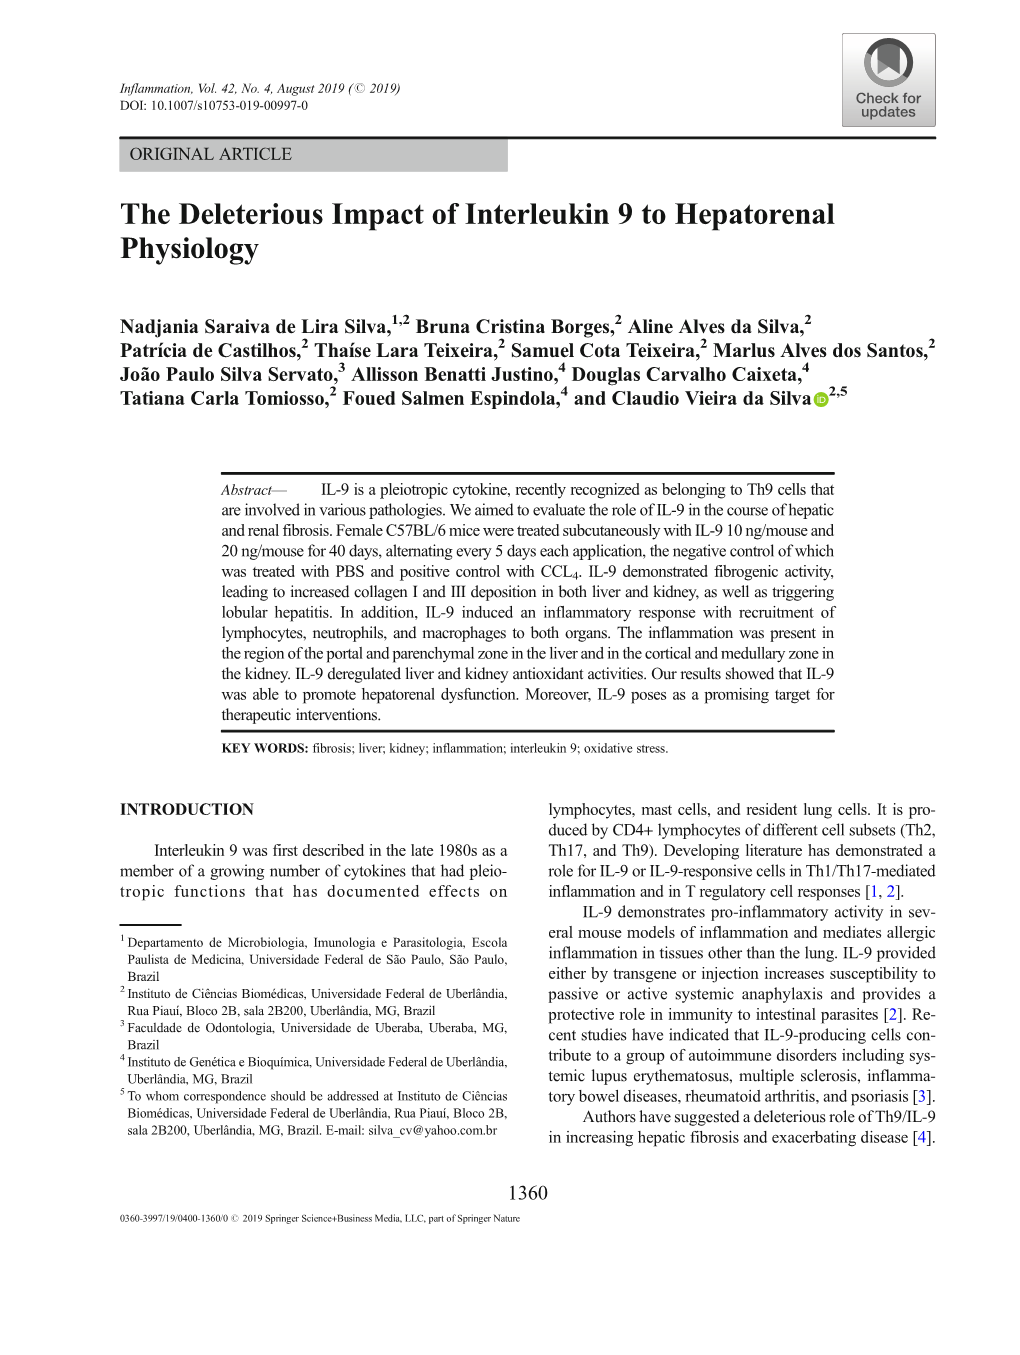 The Deleterious Impact of Interleukin 9 to Hepatorenal Physiology